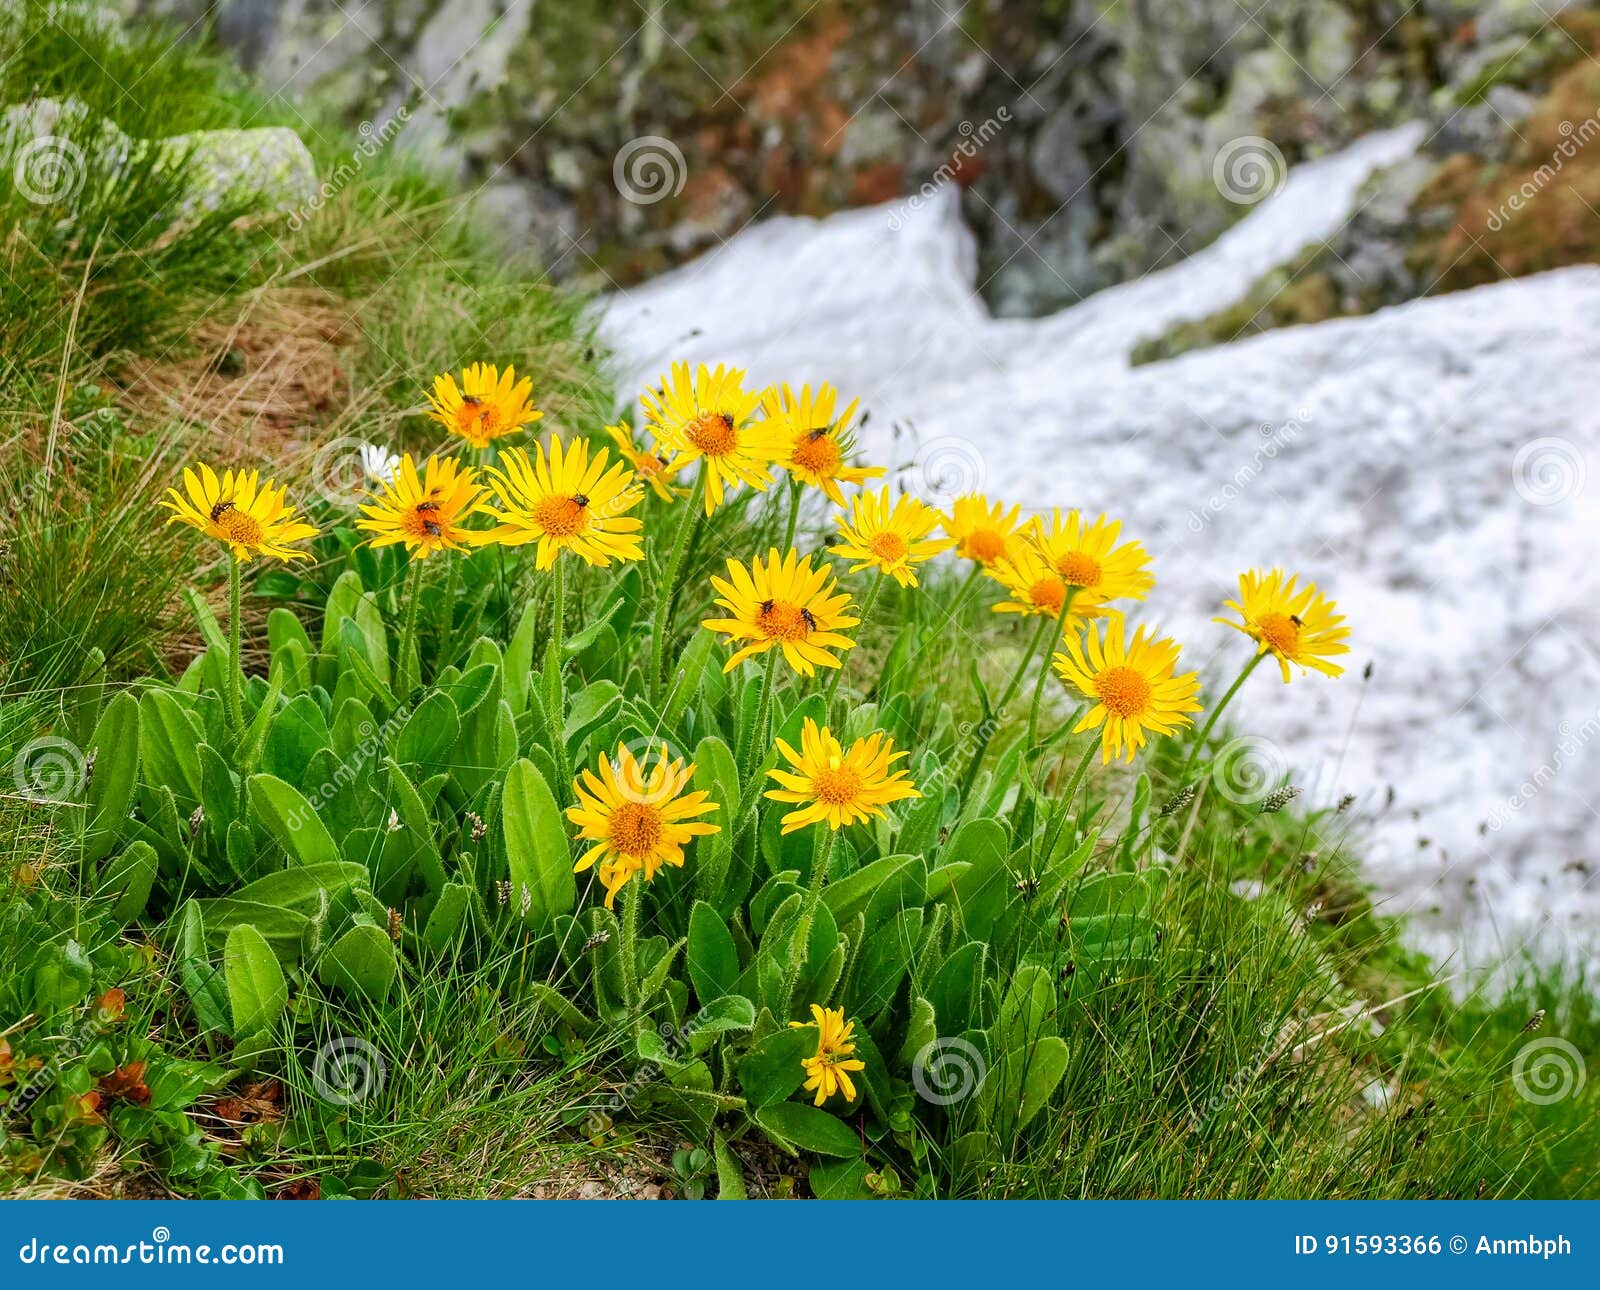 group flowers of the arnica montana in the tatra mountains